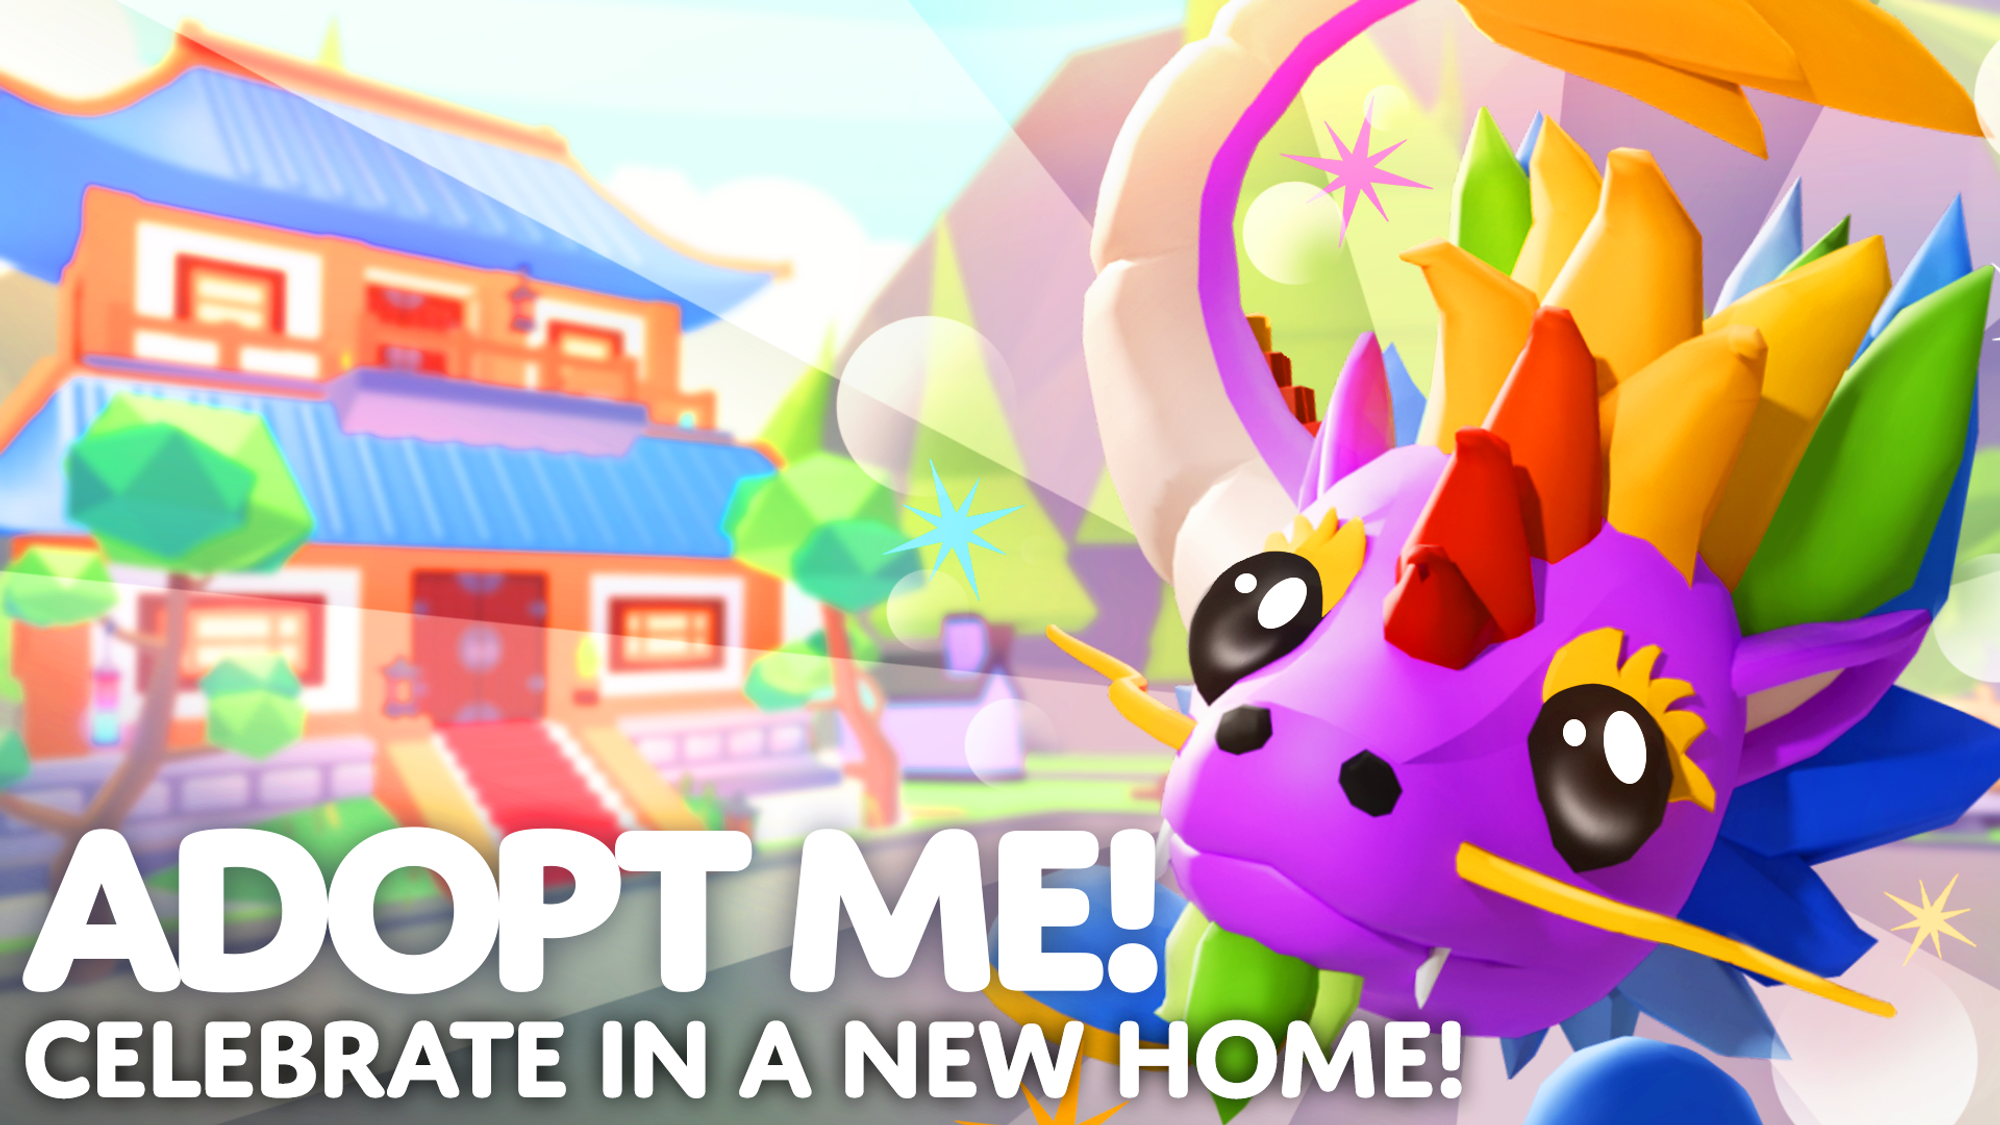 Rainbow Dragon welcomes you to Week 2 of our Lunar New Year Update: Celebrate in a new home, with the new Korean House in the background! 